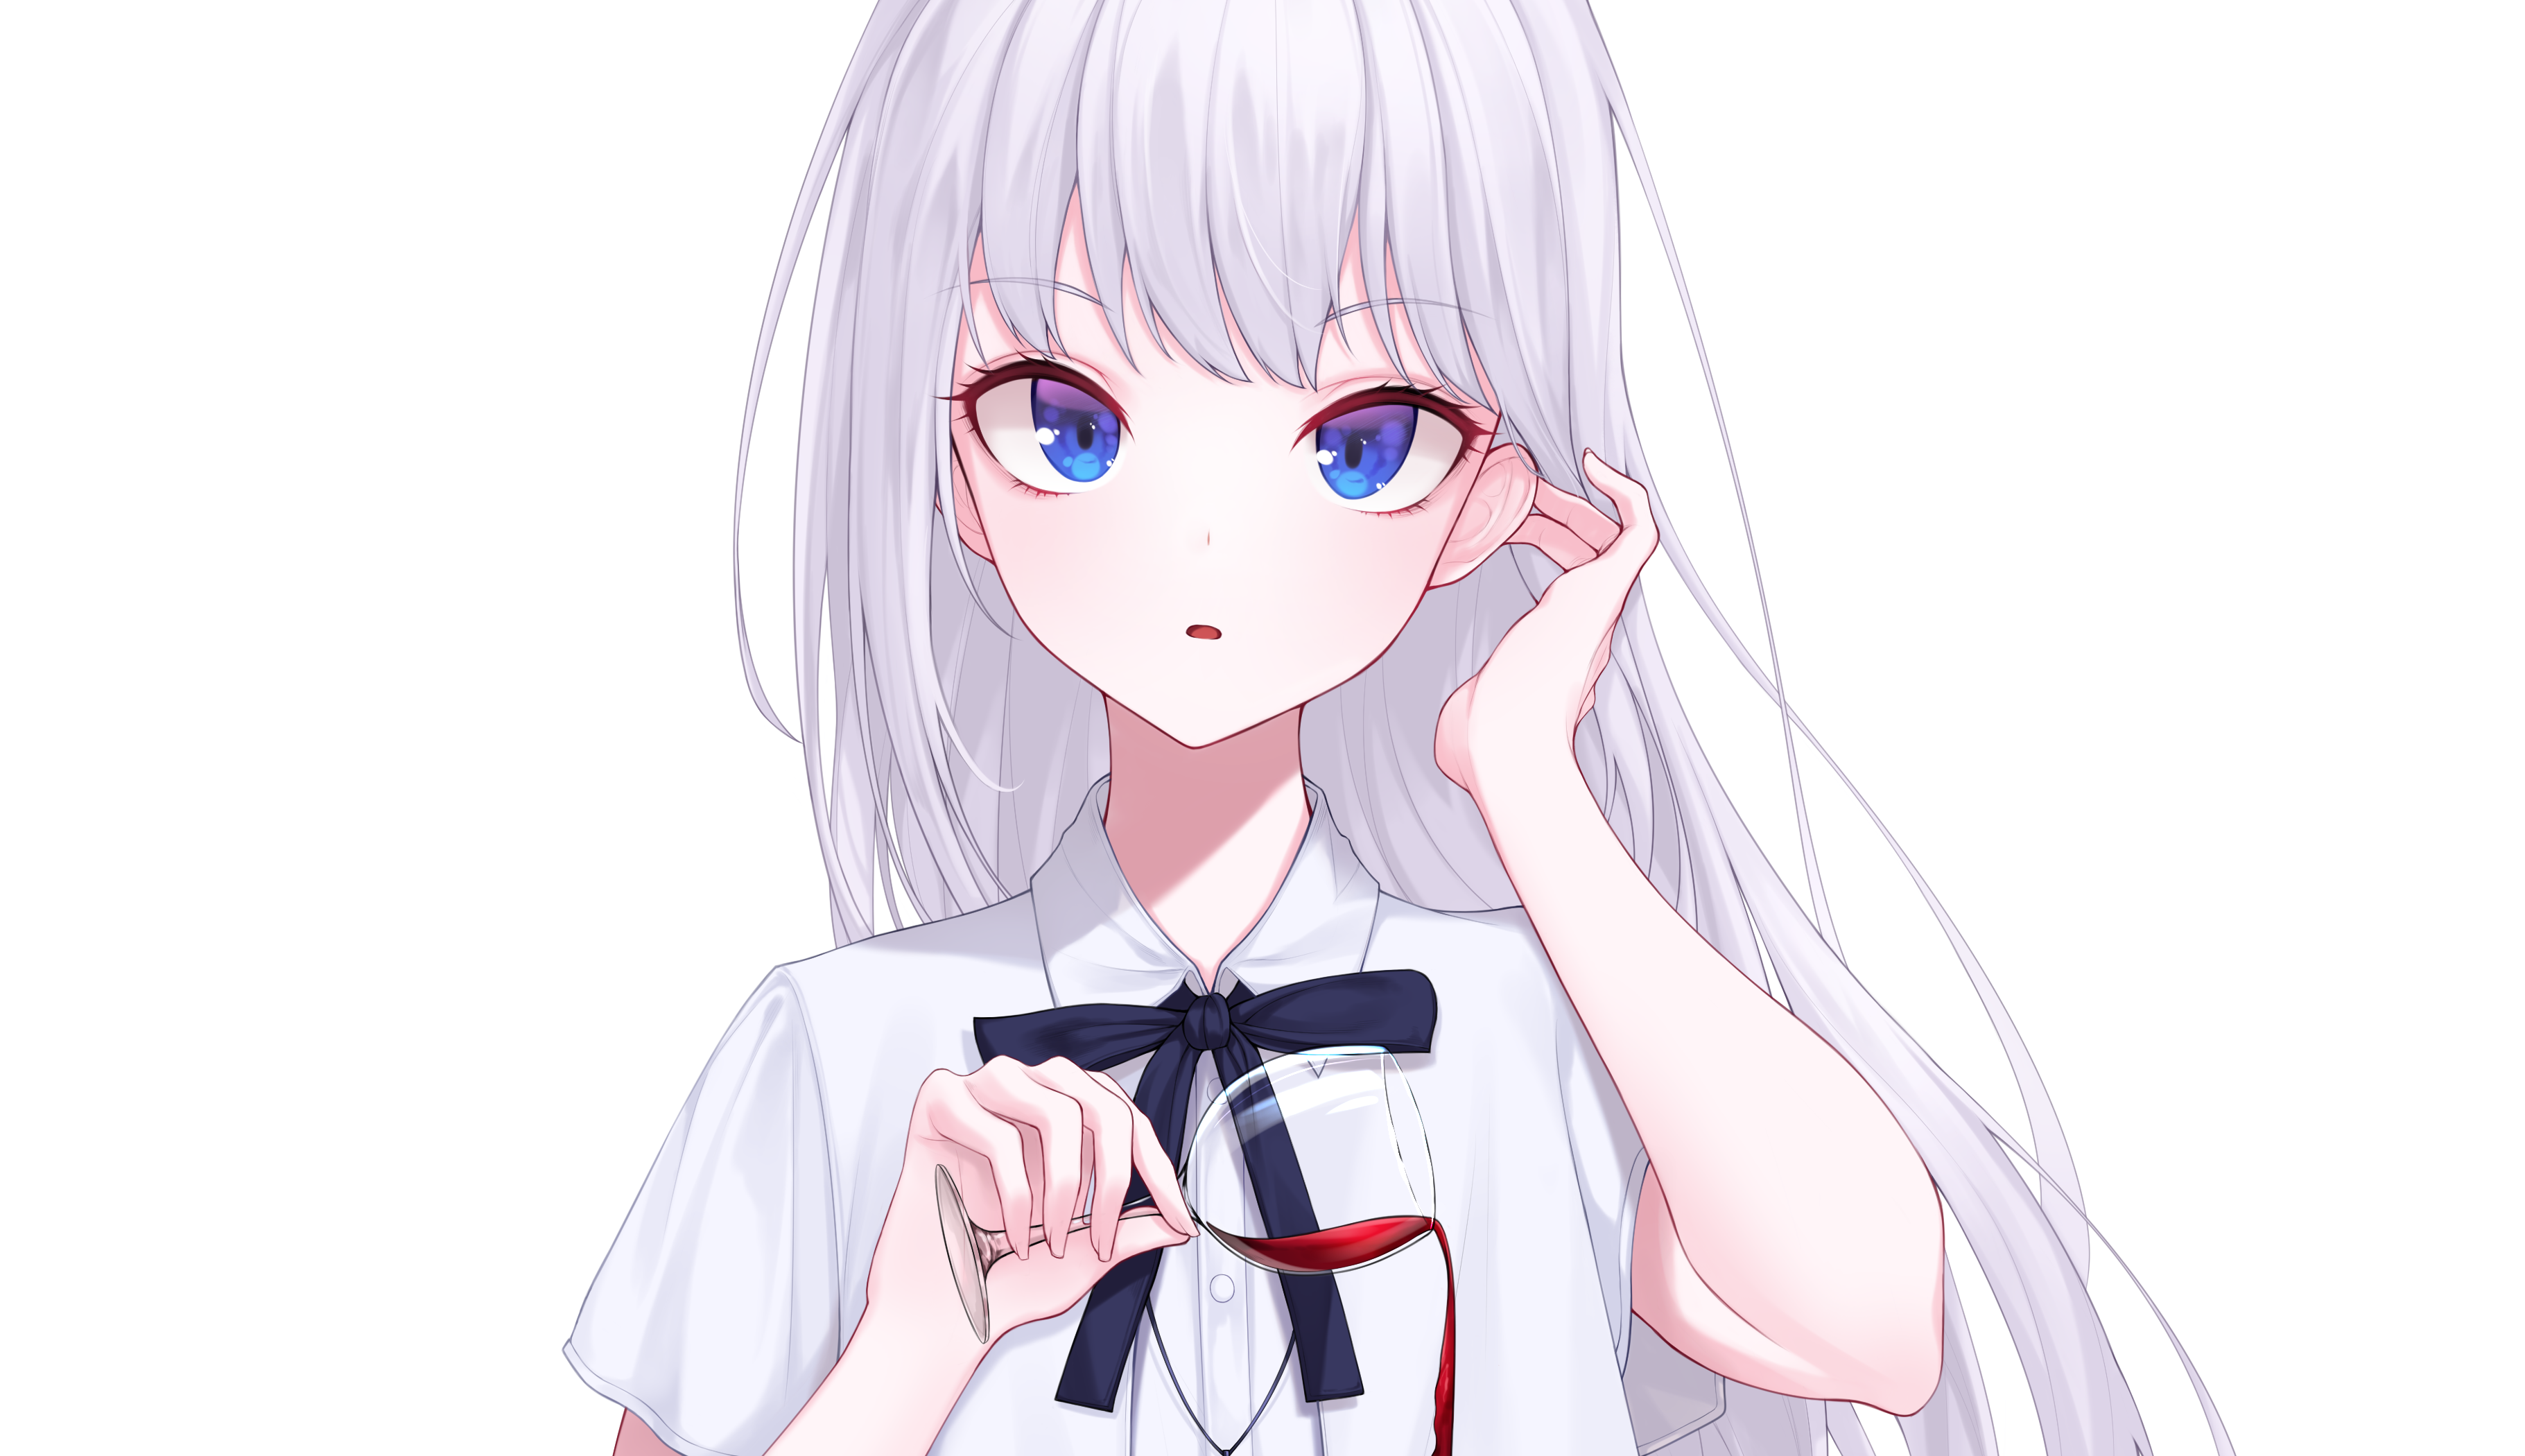 White Haired Anime Girl with Blue Eyes - wide 1